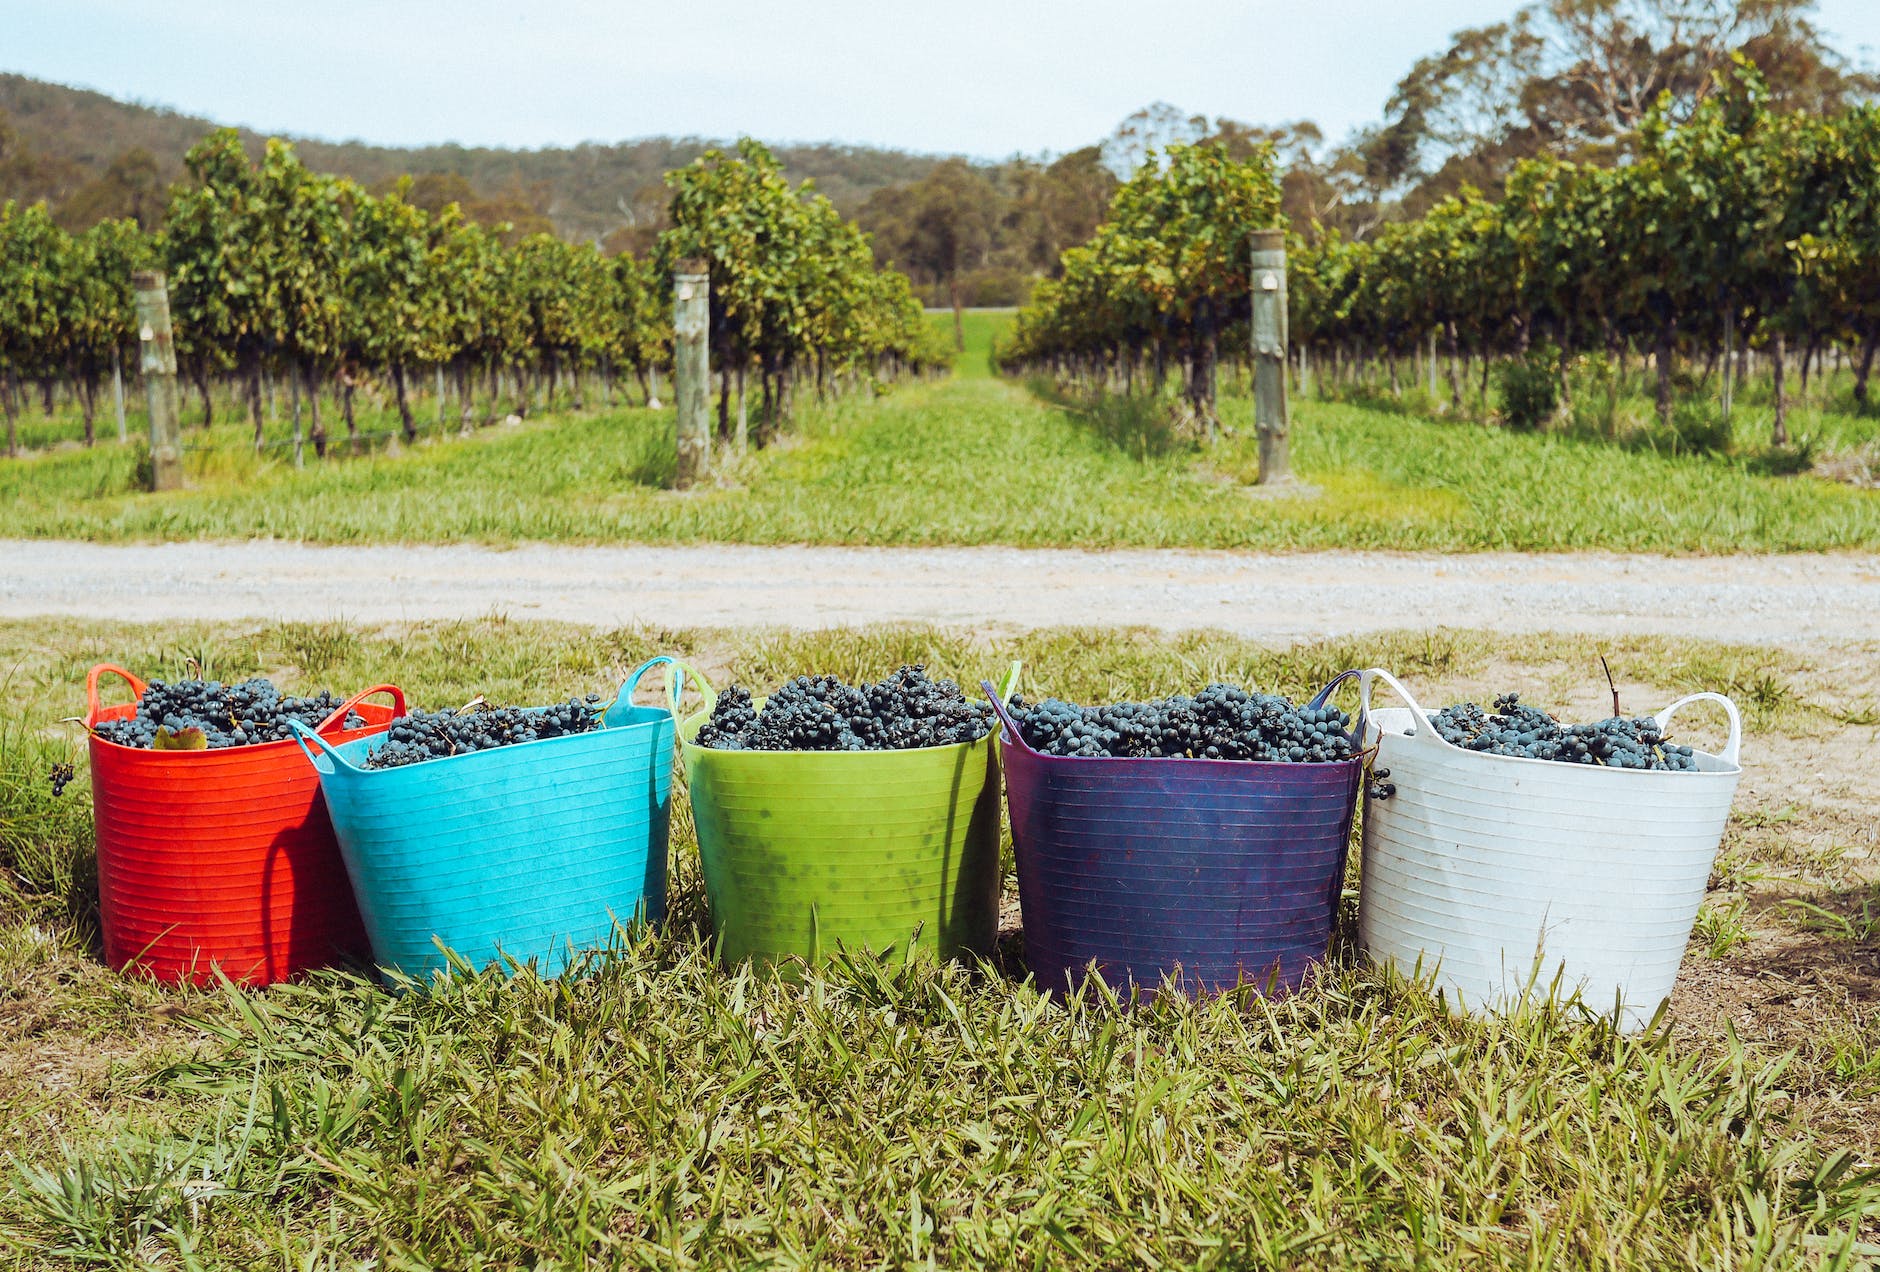 colorful baskets full of grapes